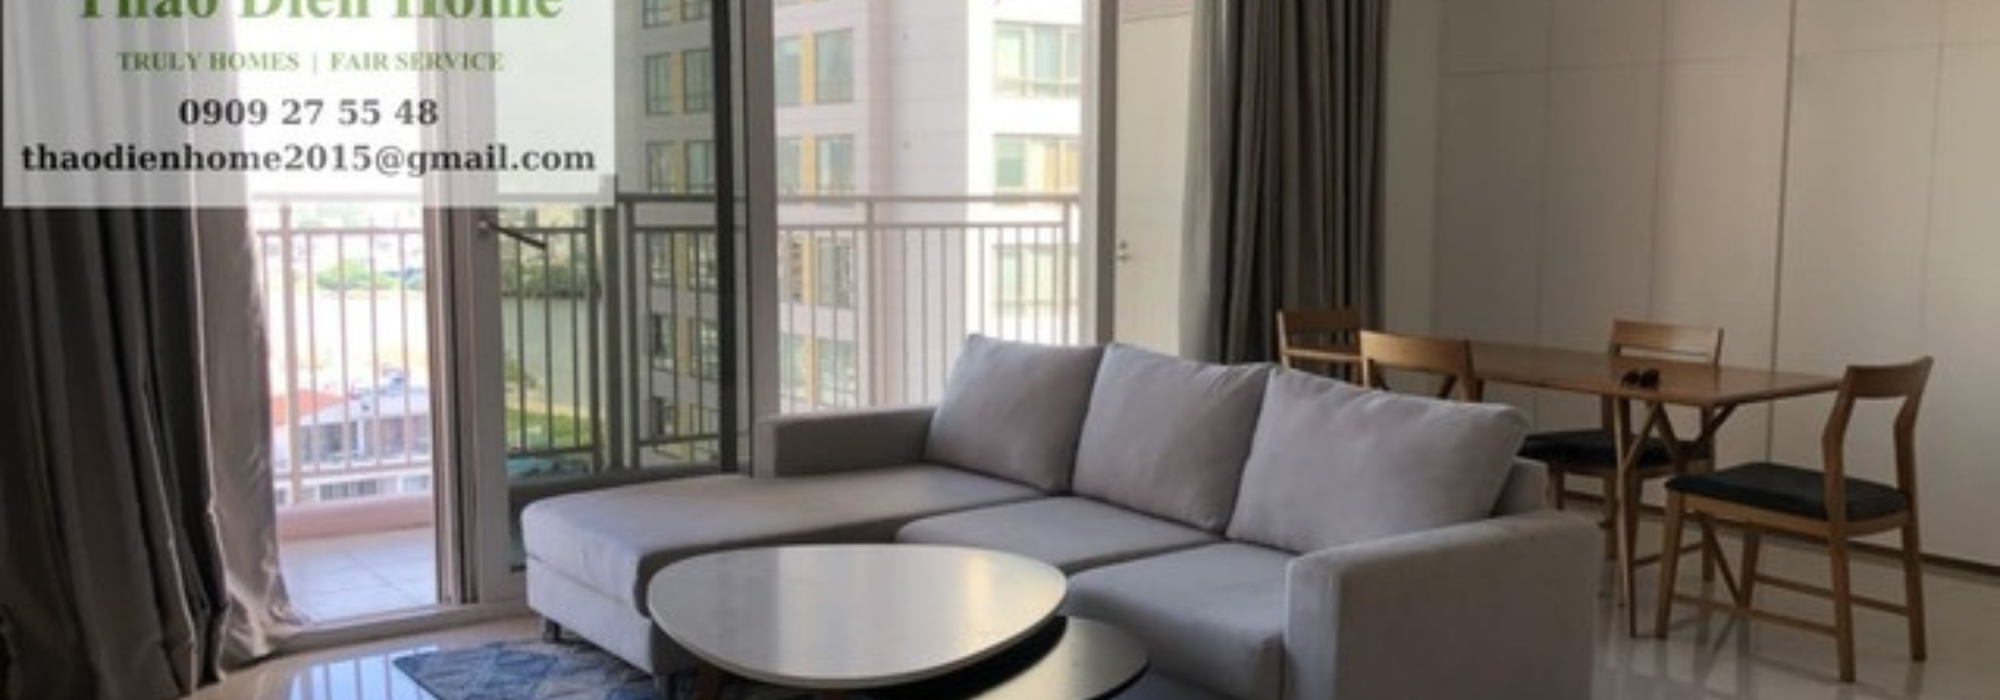 Beautiful Design And Fully-Furnished Apartment For Rent In Xi Riverview